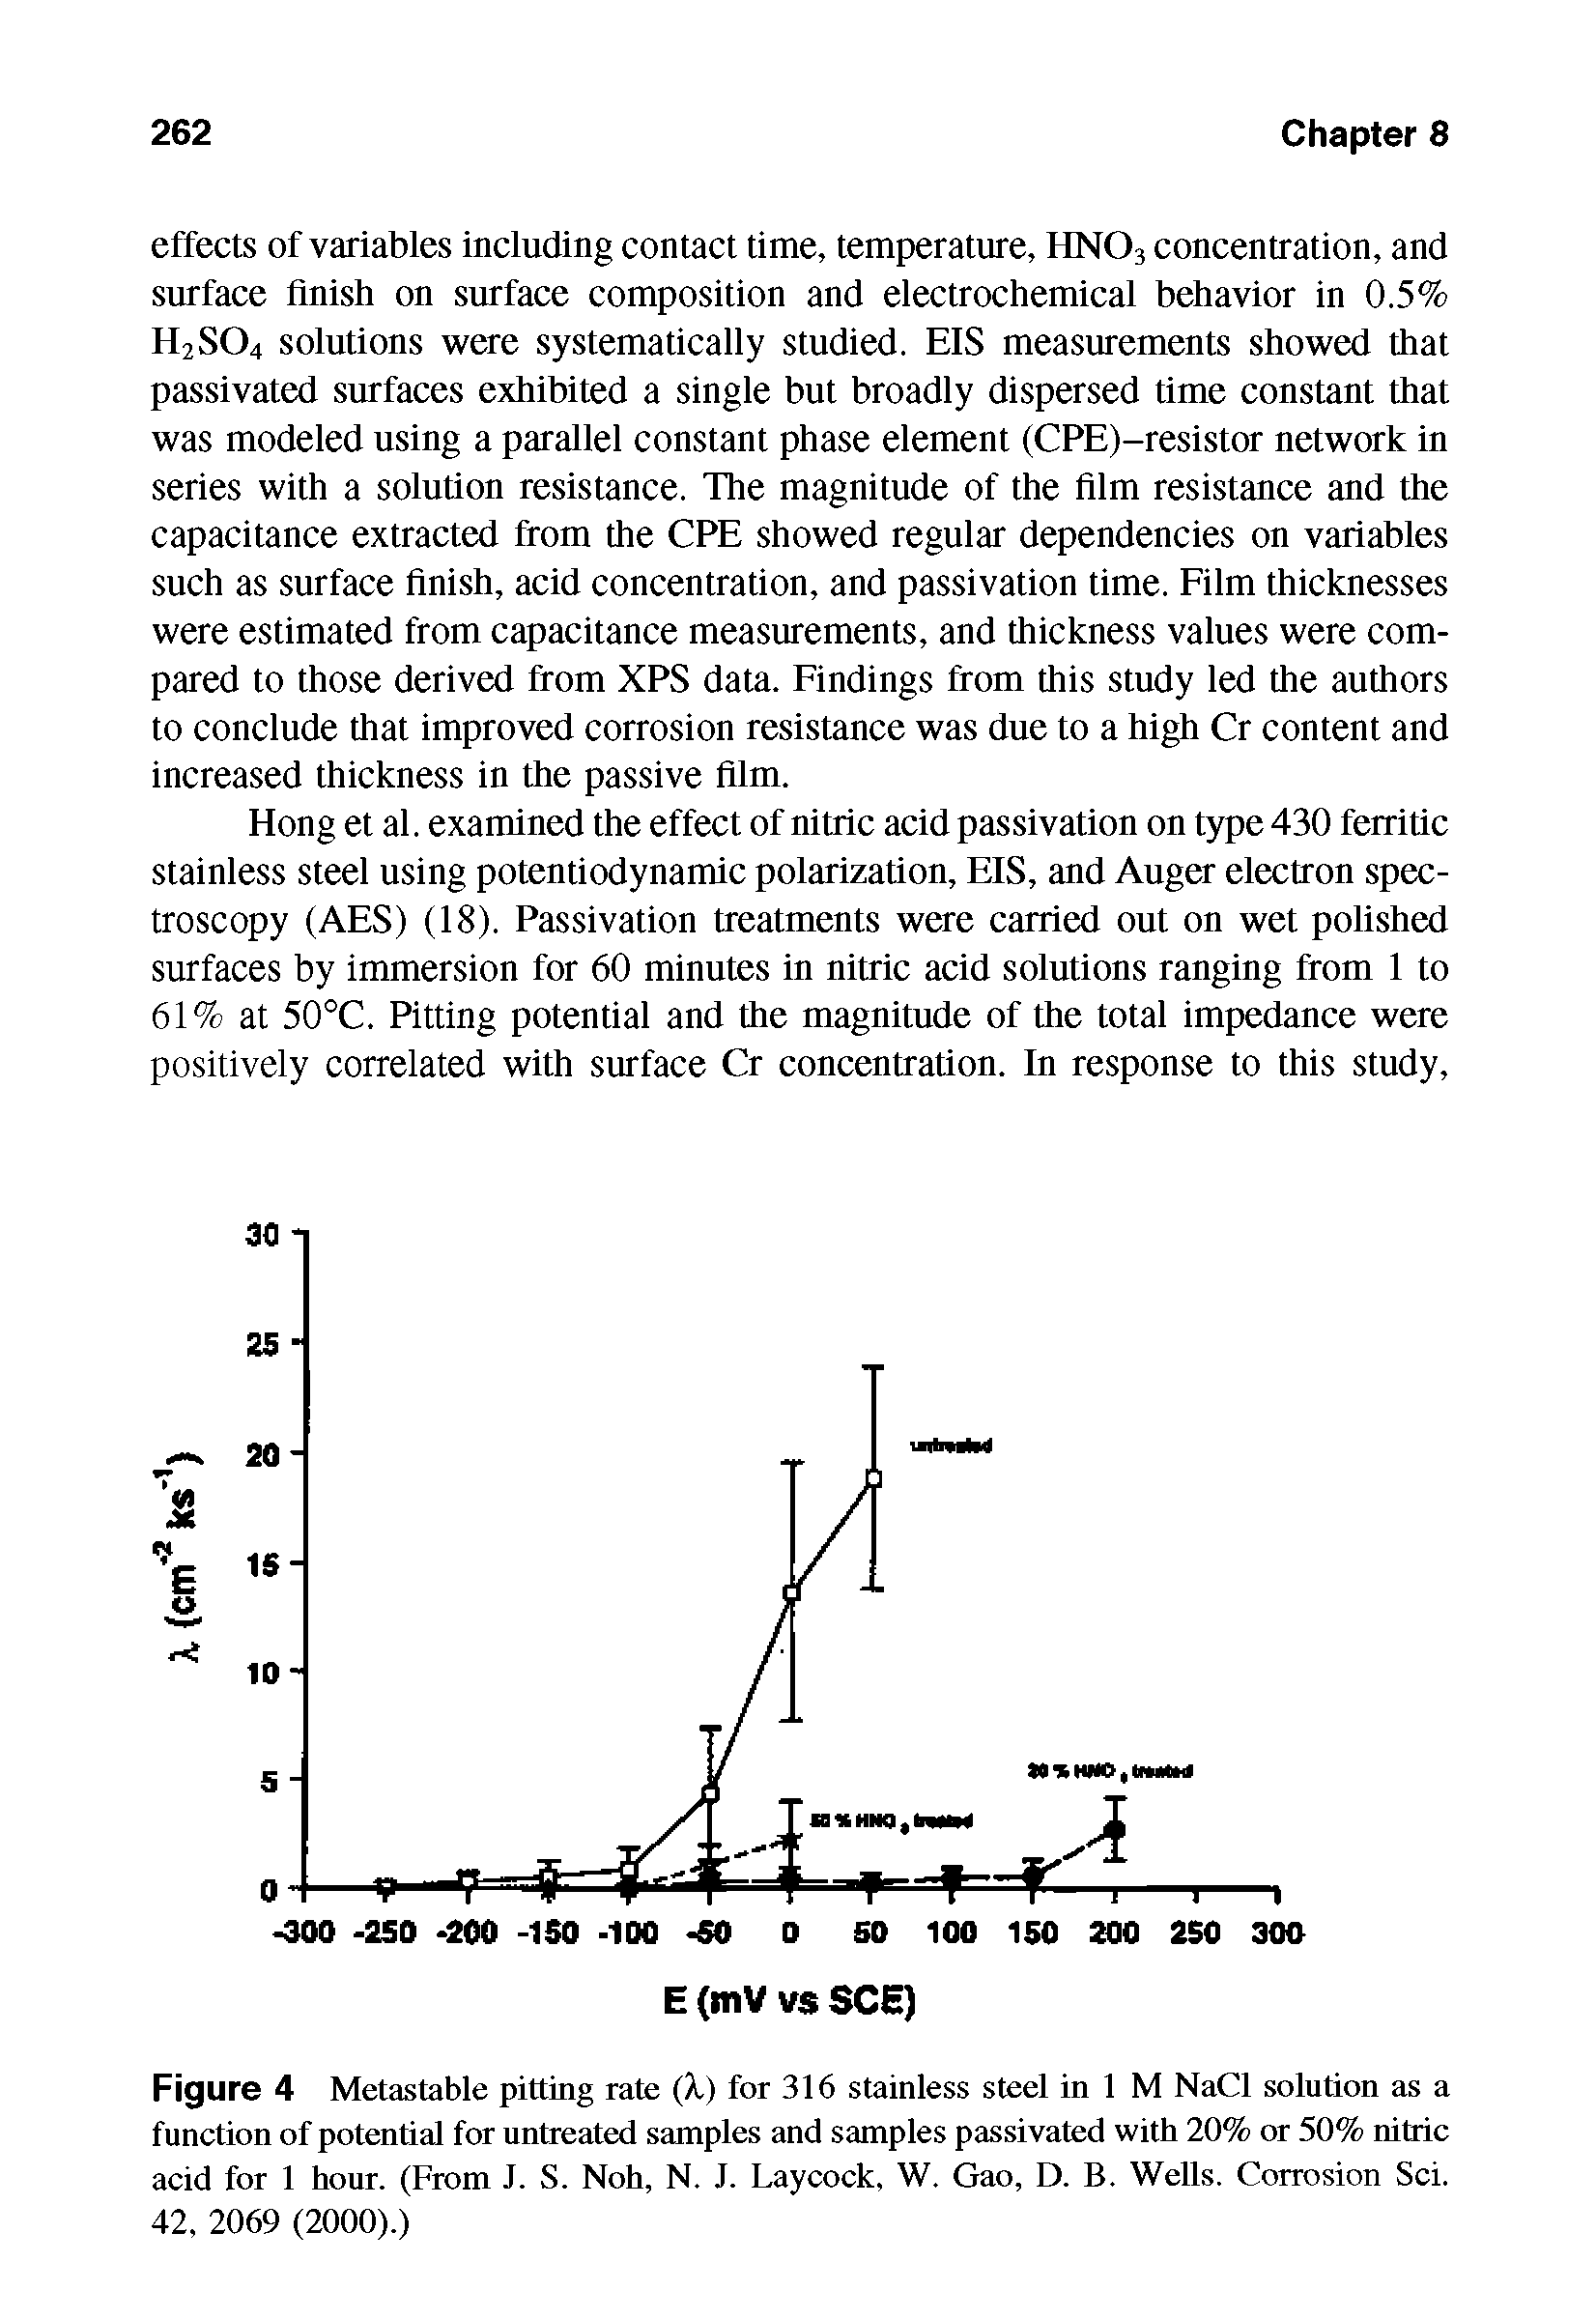 Figure 4 Metastable pitting rate (k) for 316 stainless steel in 1 M NaCl solution as a function of potential for untreated samples and samples passivated with 20% or 50% nitric acid for 1 hour. (From J. S. Noh, N. J. Laycock, W. Gao, D. B. Wells. Corrosion Sci. 42, 2069 (2000).)...